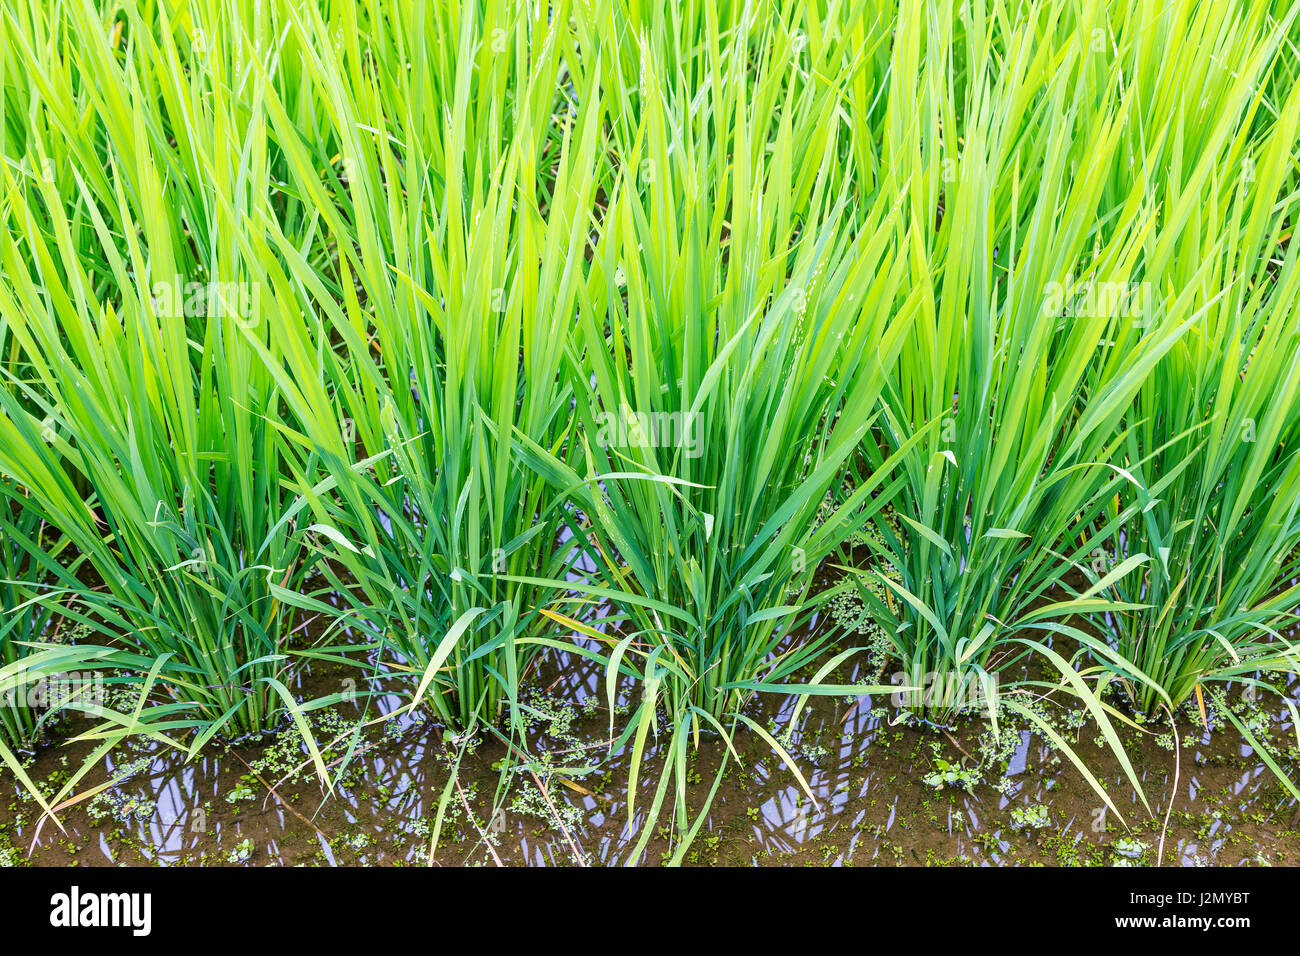 Rice filed filled with water, showing long green leaves of rice plants Stock Photo